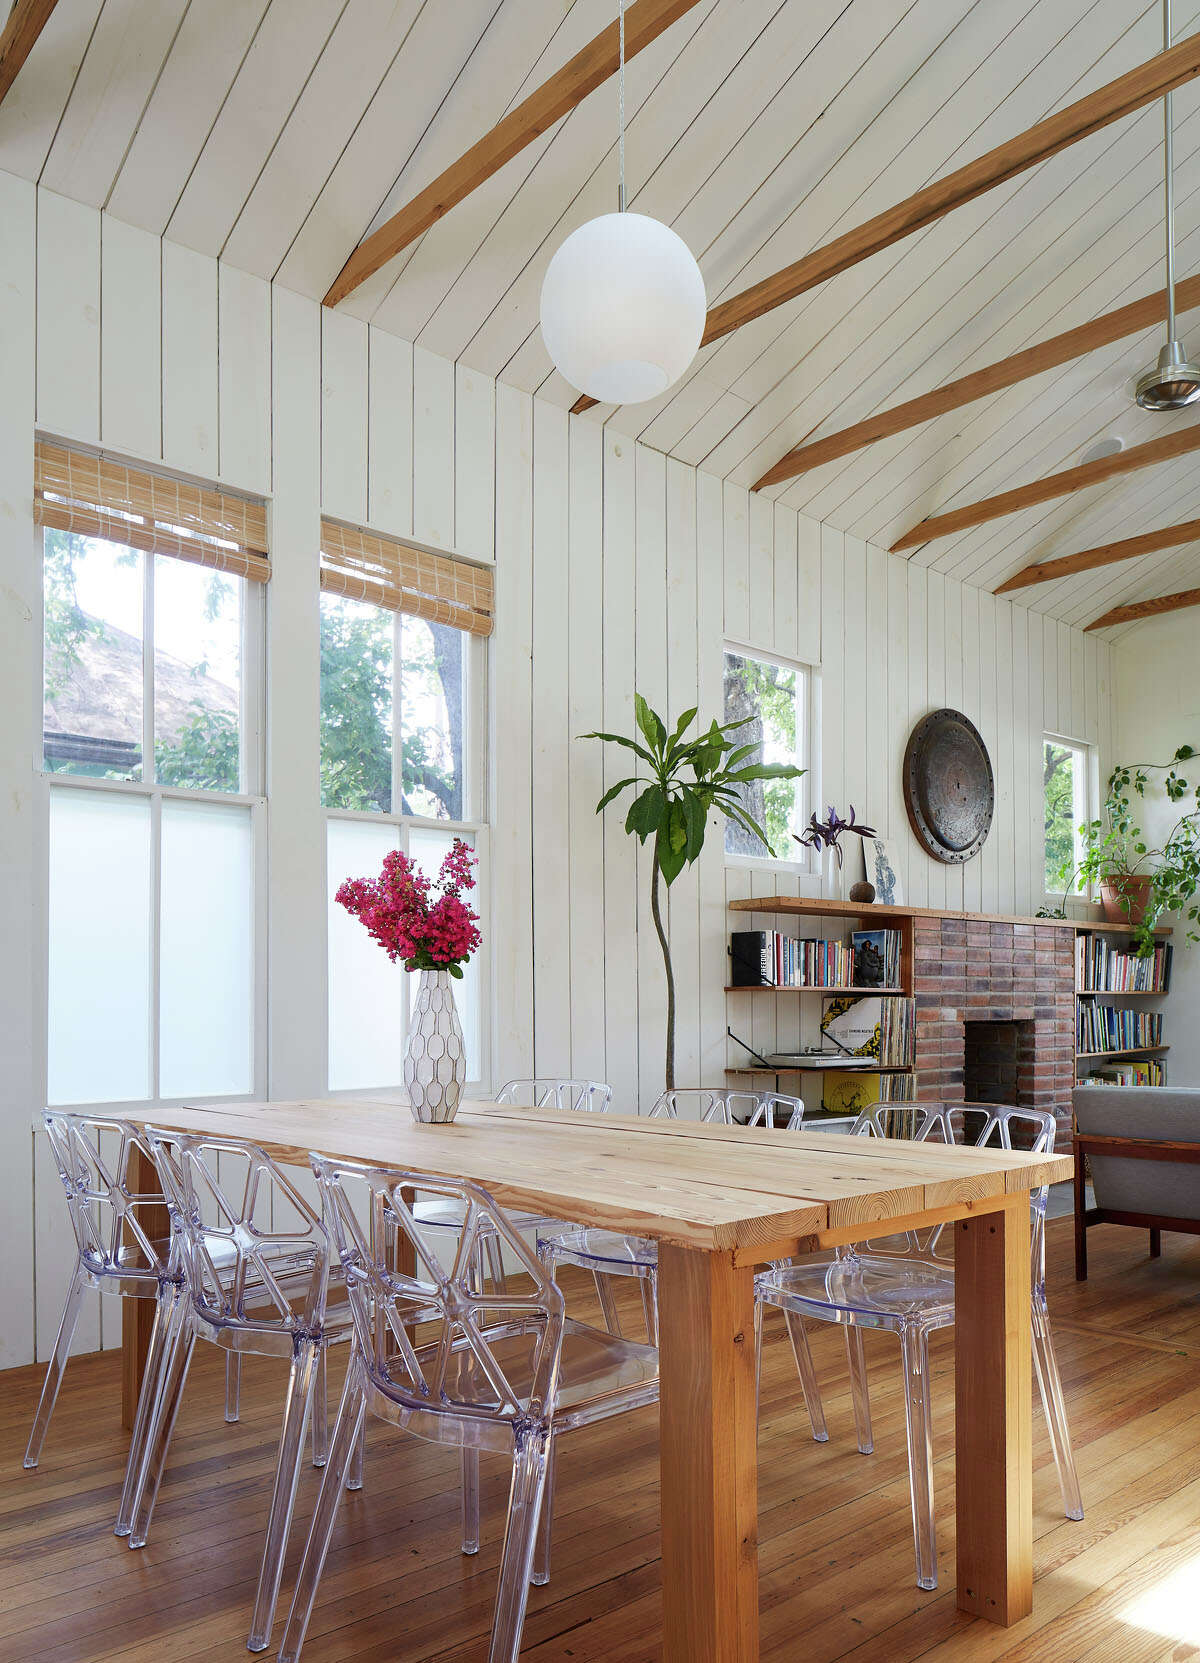 The dining room table was made of wood reclaimed from another part of the house.